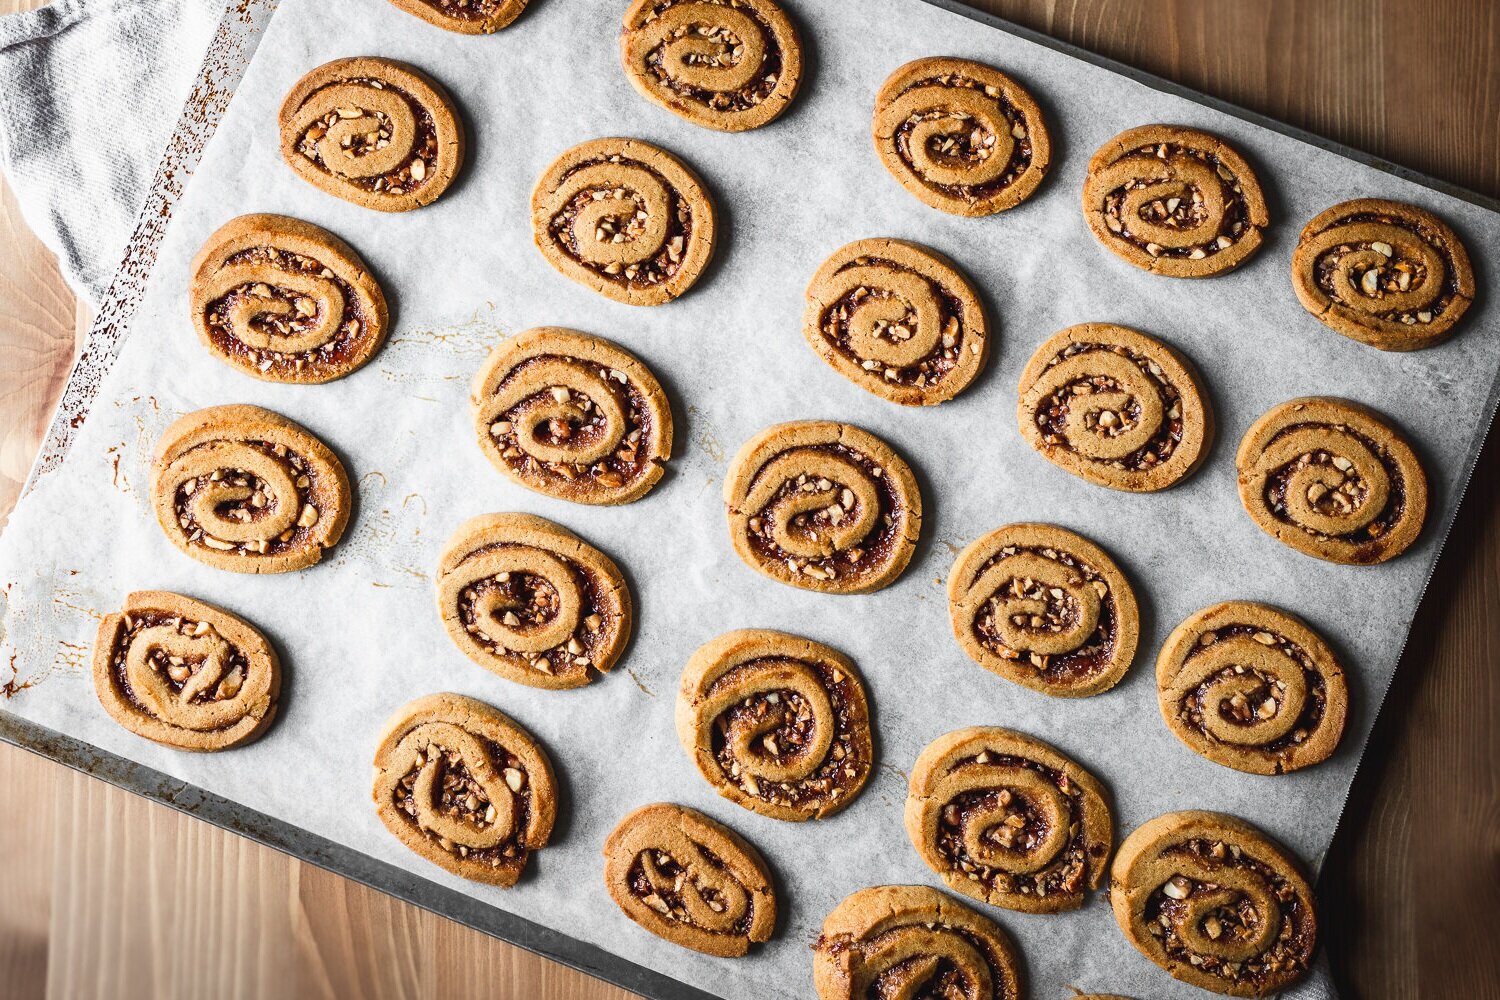 Peanut Butter and Jelly Swirl Cookies